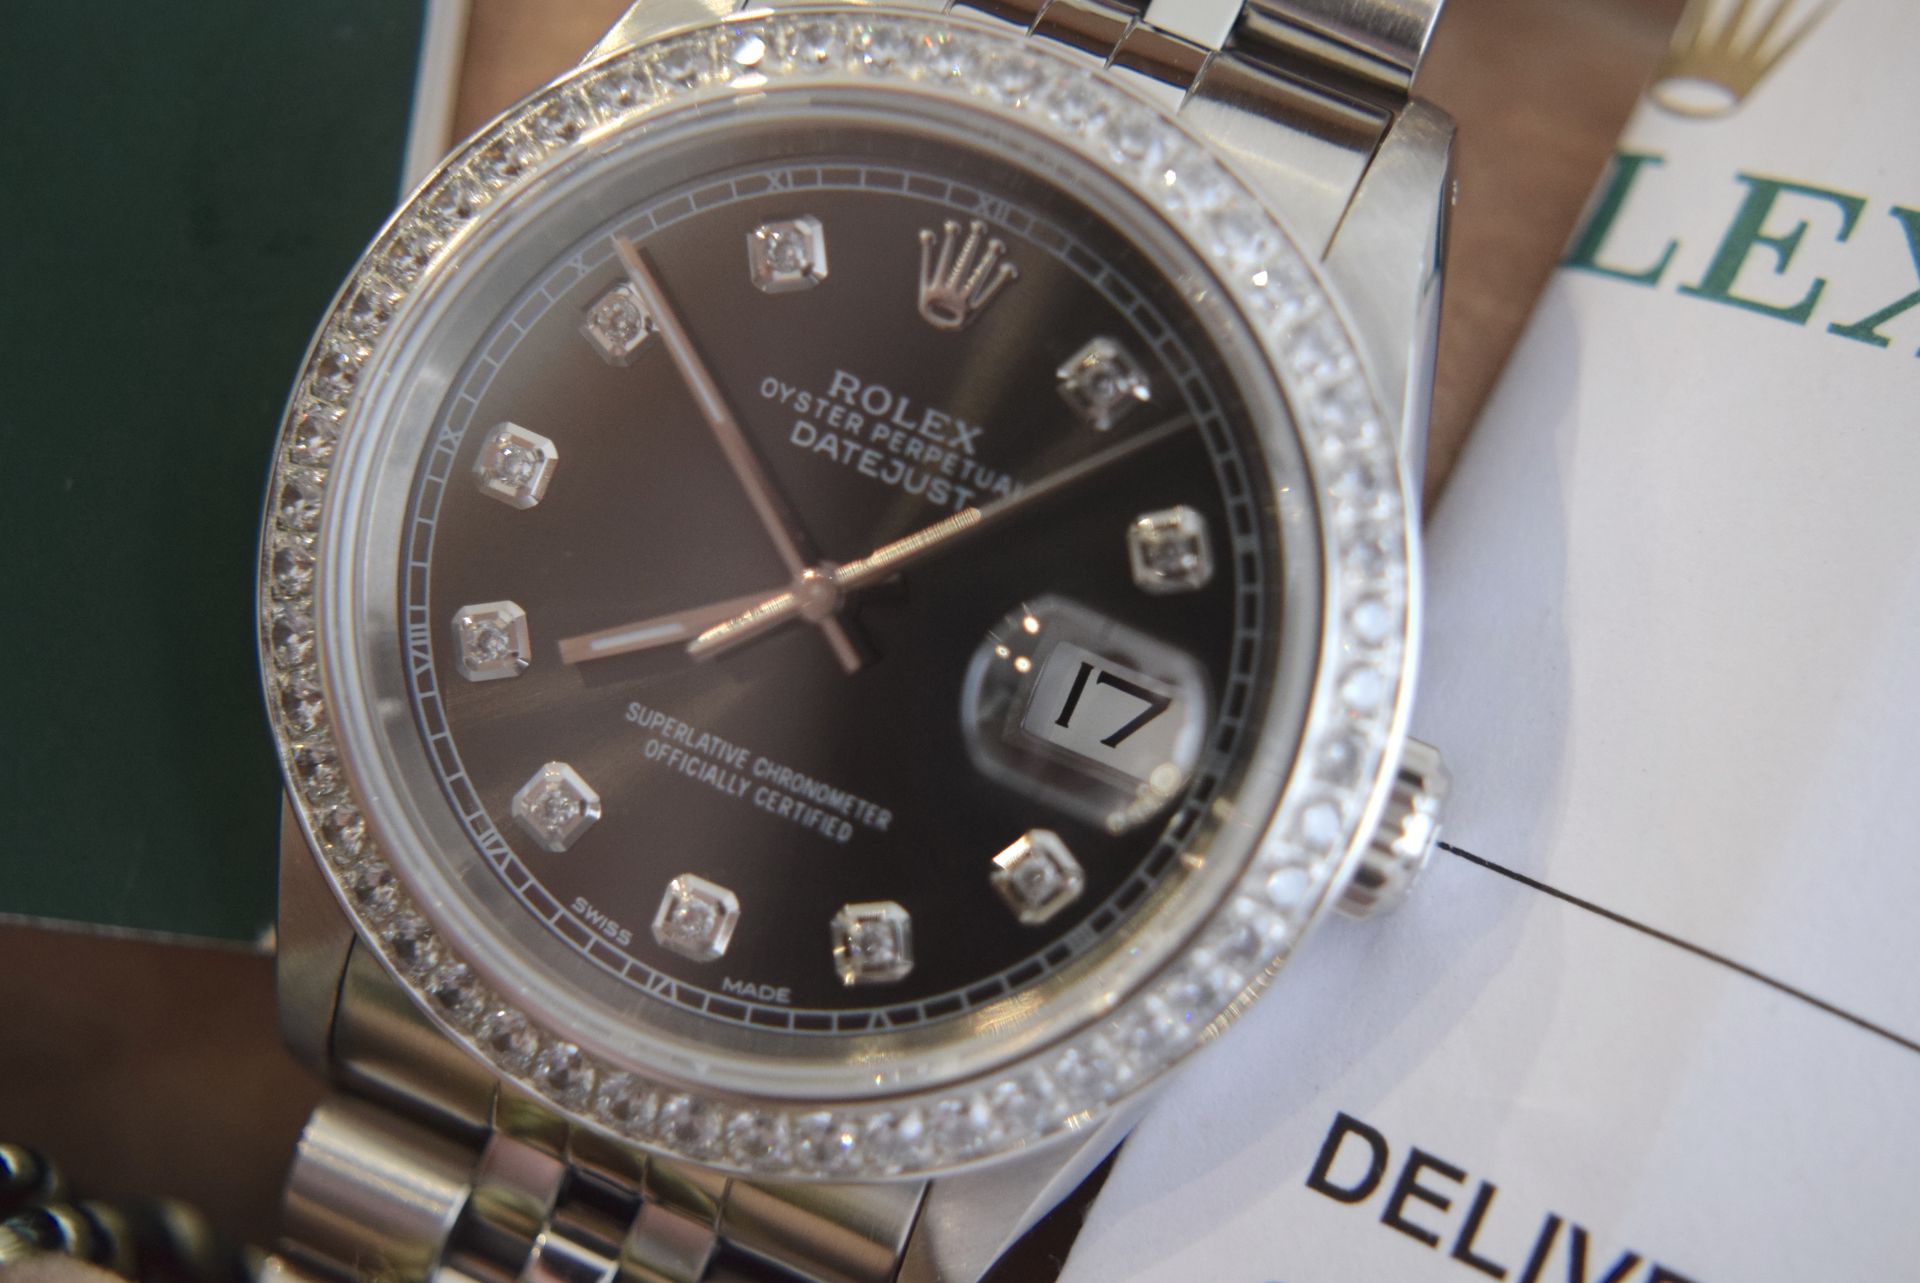 ROLEX STEEL DATEJUST 36' (GENTS) SLATE GREY DIAL - Image 12 of 12